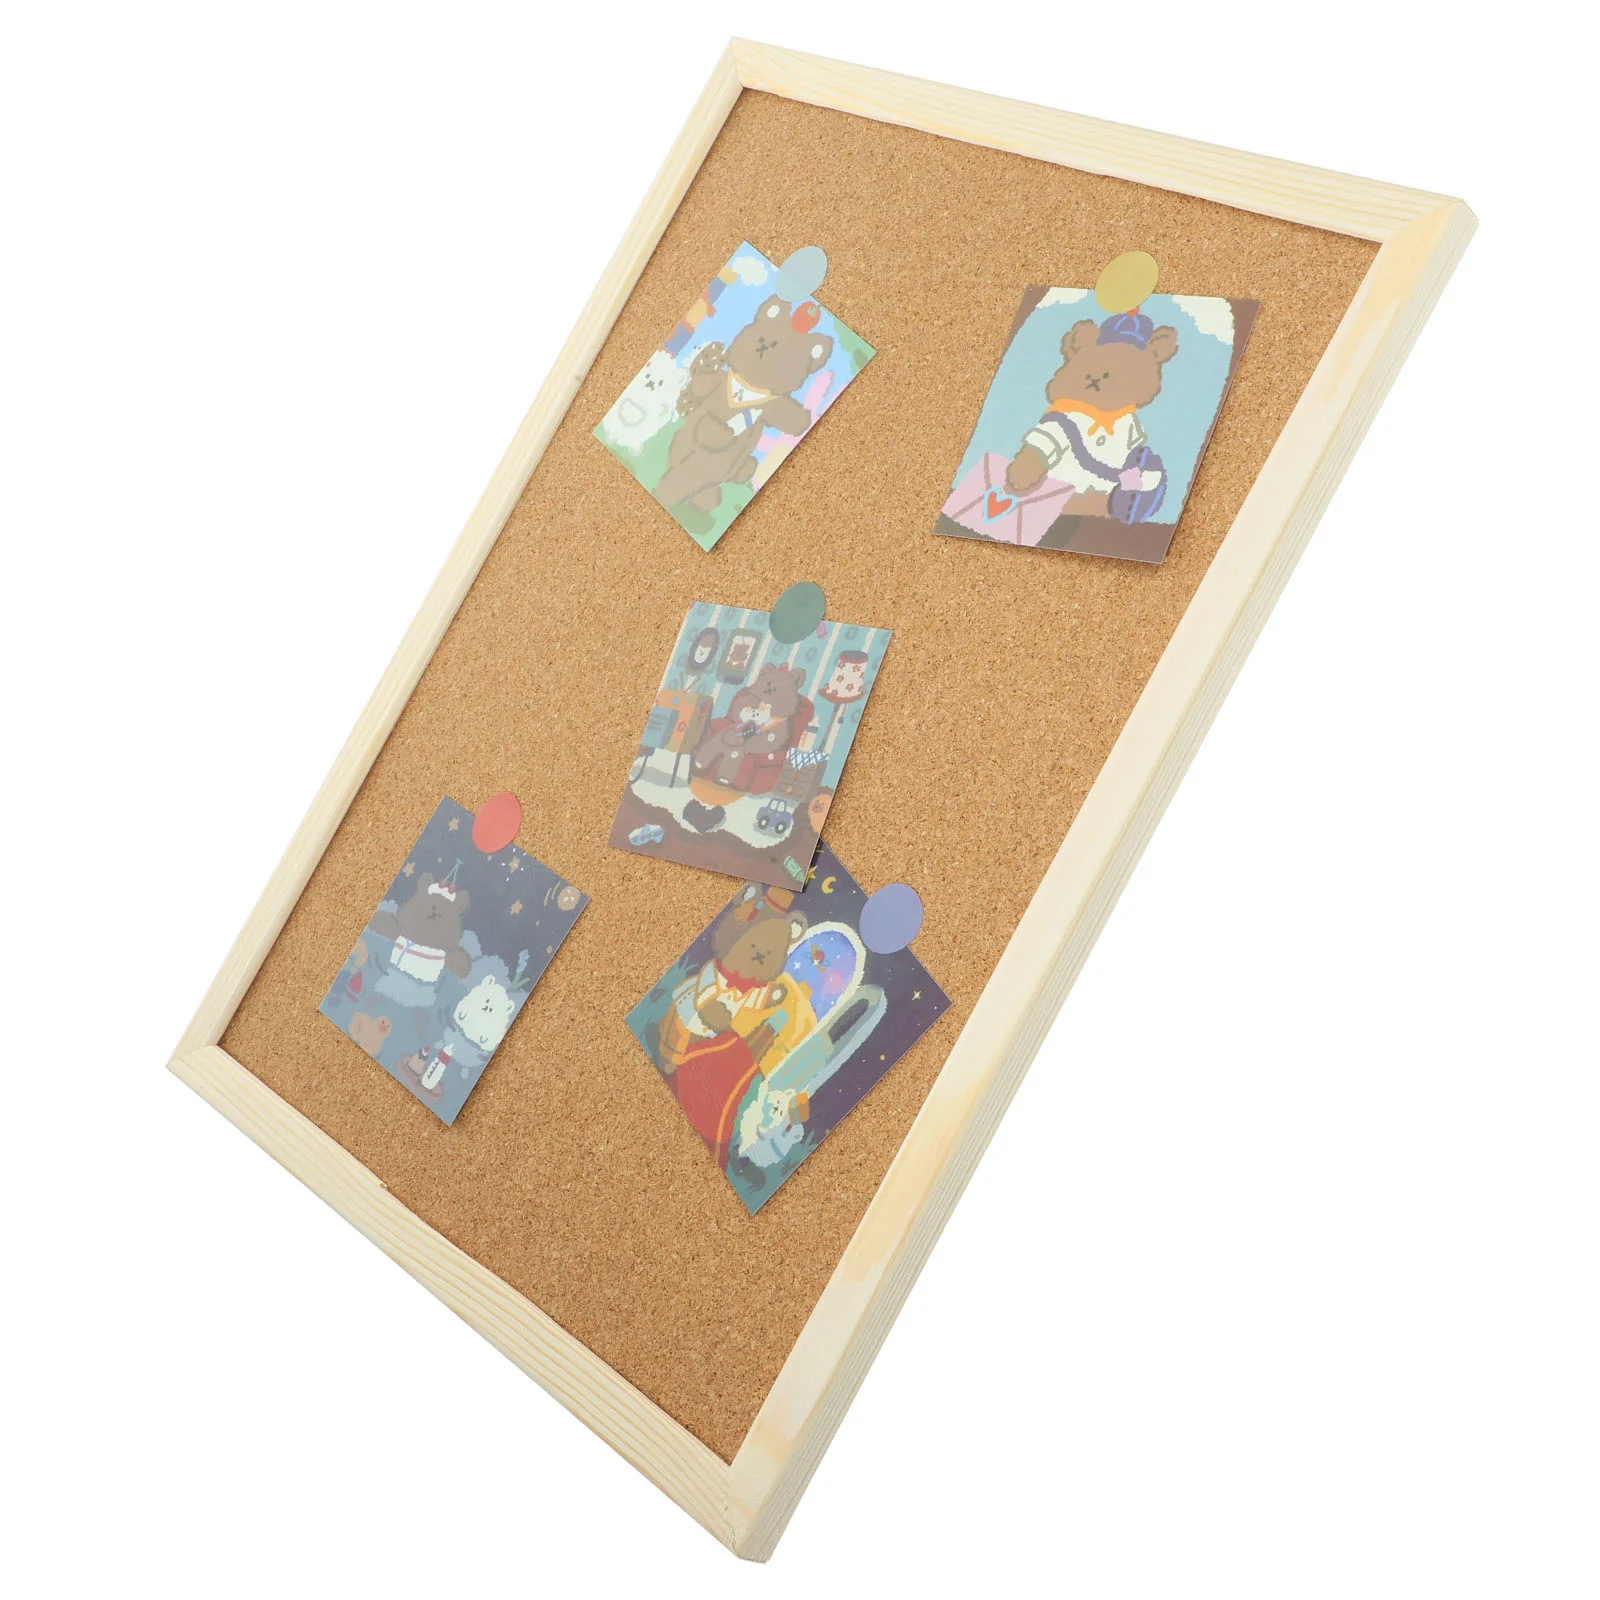 

Bulletin Board Announcement Household Office Notice Creative Message Display Pure Wood Pulp Cork Memo Boards Student Corkboard